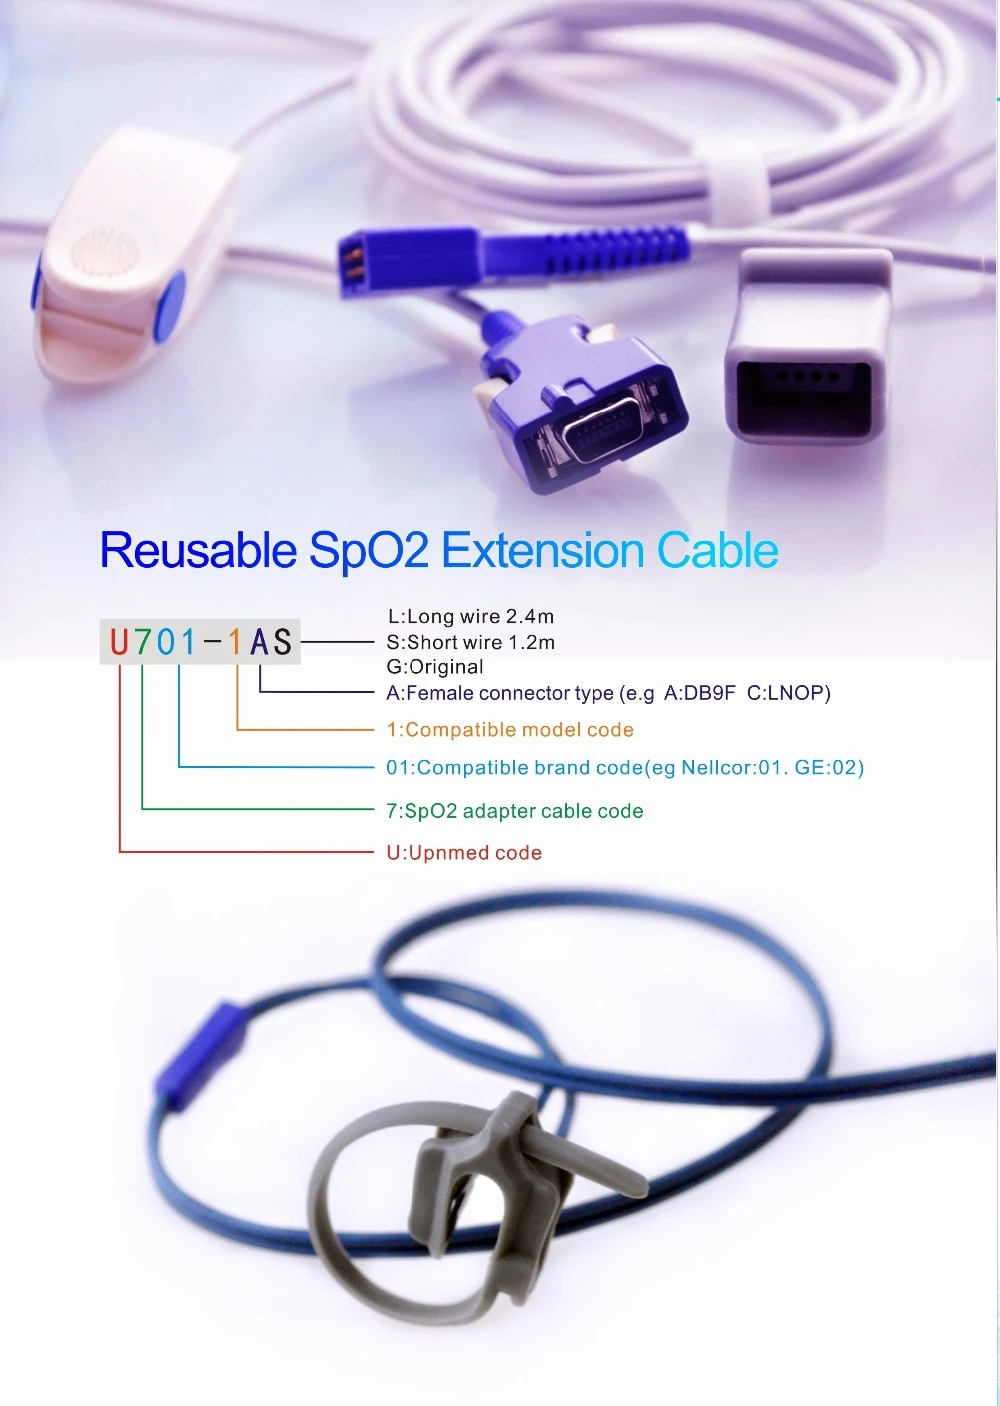 Spo2 extension cable1.jpg